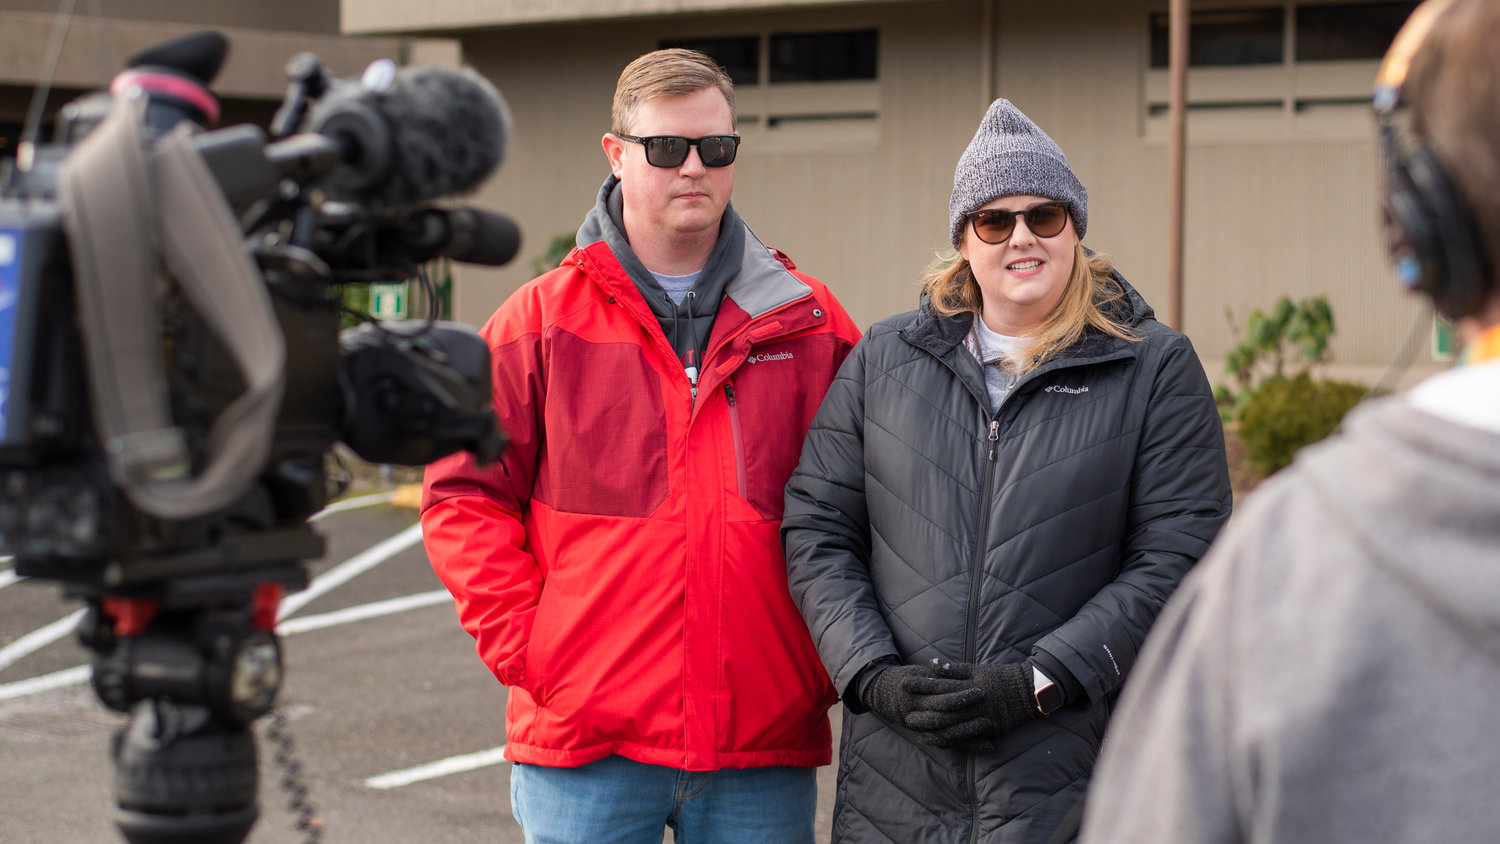 Erik and Jaime Jo Hiles describe the support they have received during an interview outside the Grays Harbor County Correctional Facility Saturday in Montesano.